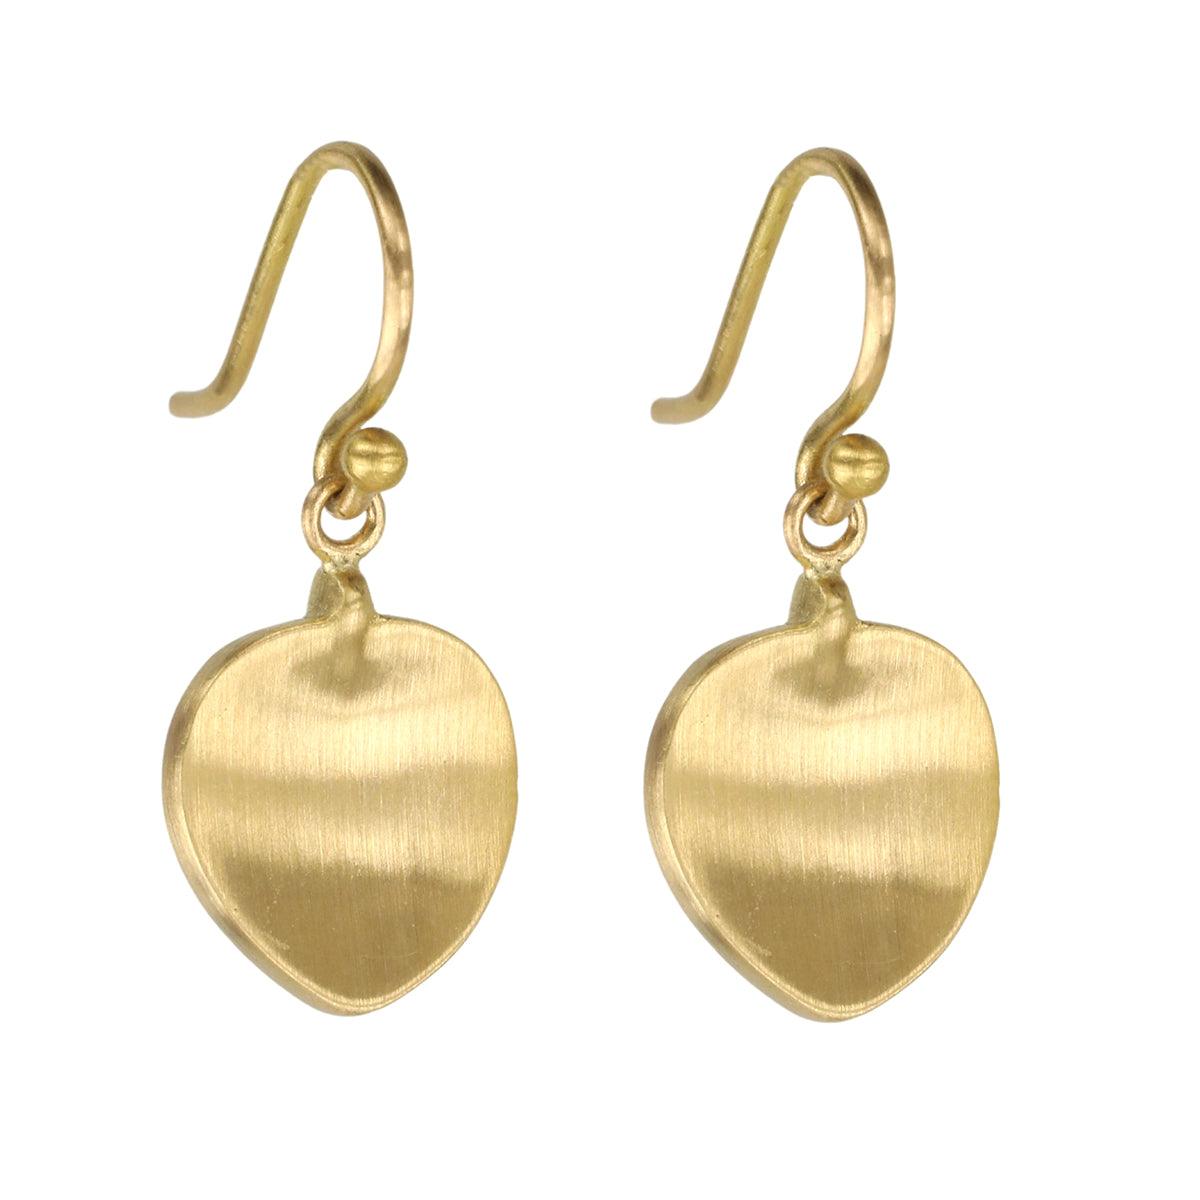 Louis Feraud Gold Tone Textured Leaf Earrings Lightweight Clip On